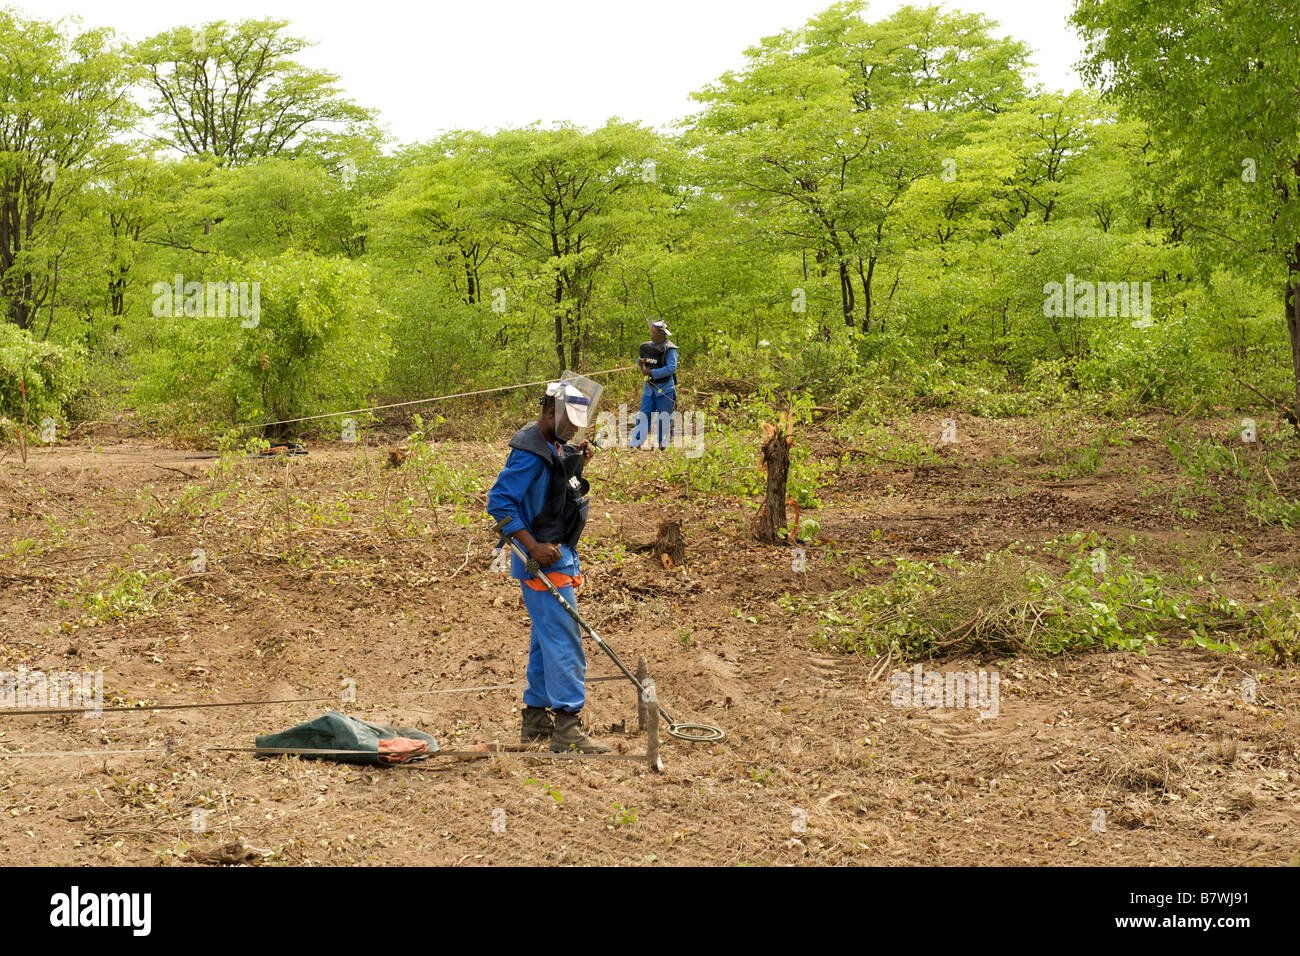 Manual deminers using metal detectors to search for unexploded ordnance in suspected minefields in Mozambique. Stock Photo